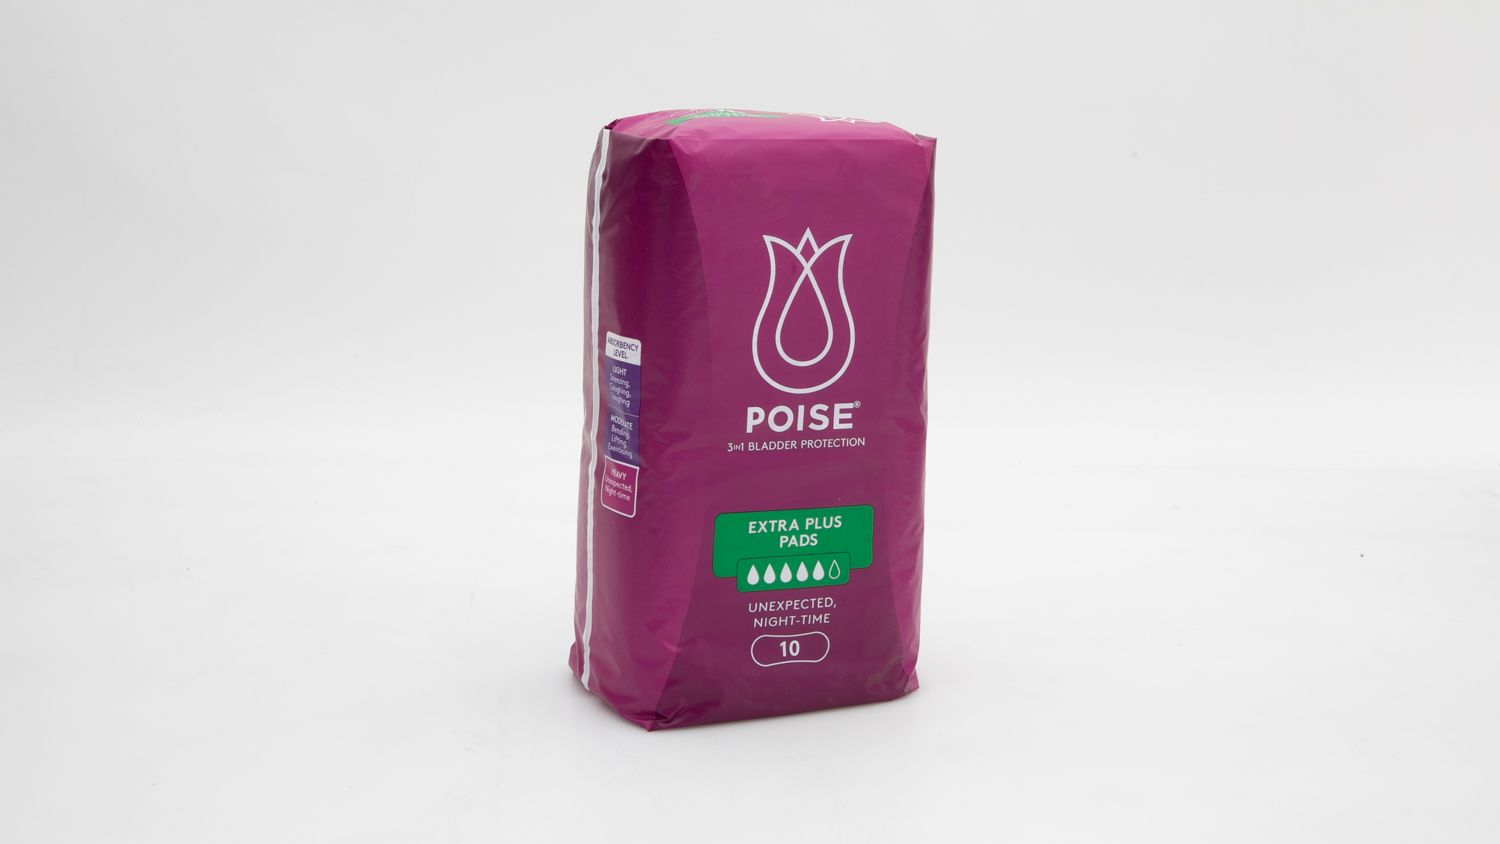 Poise Extra Plus Pads carousel image